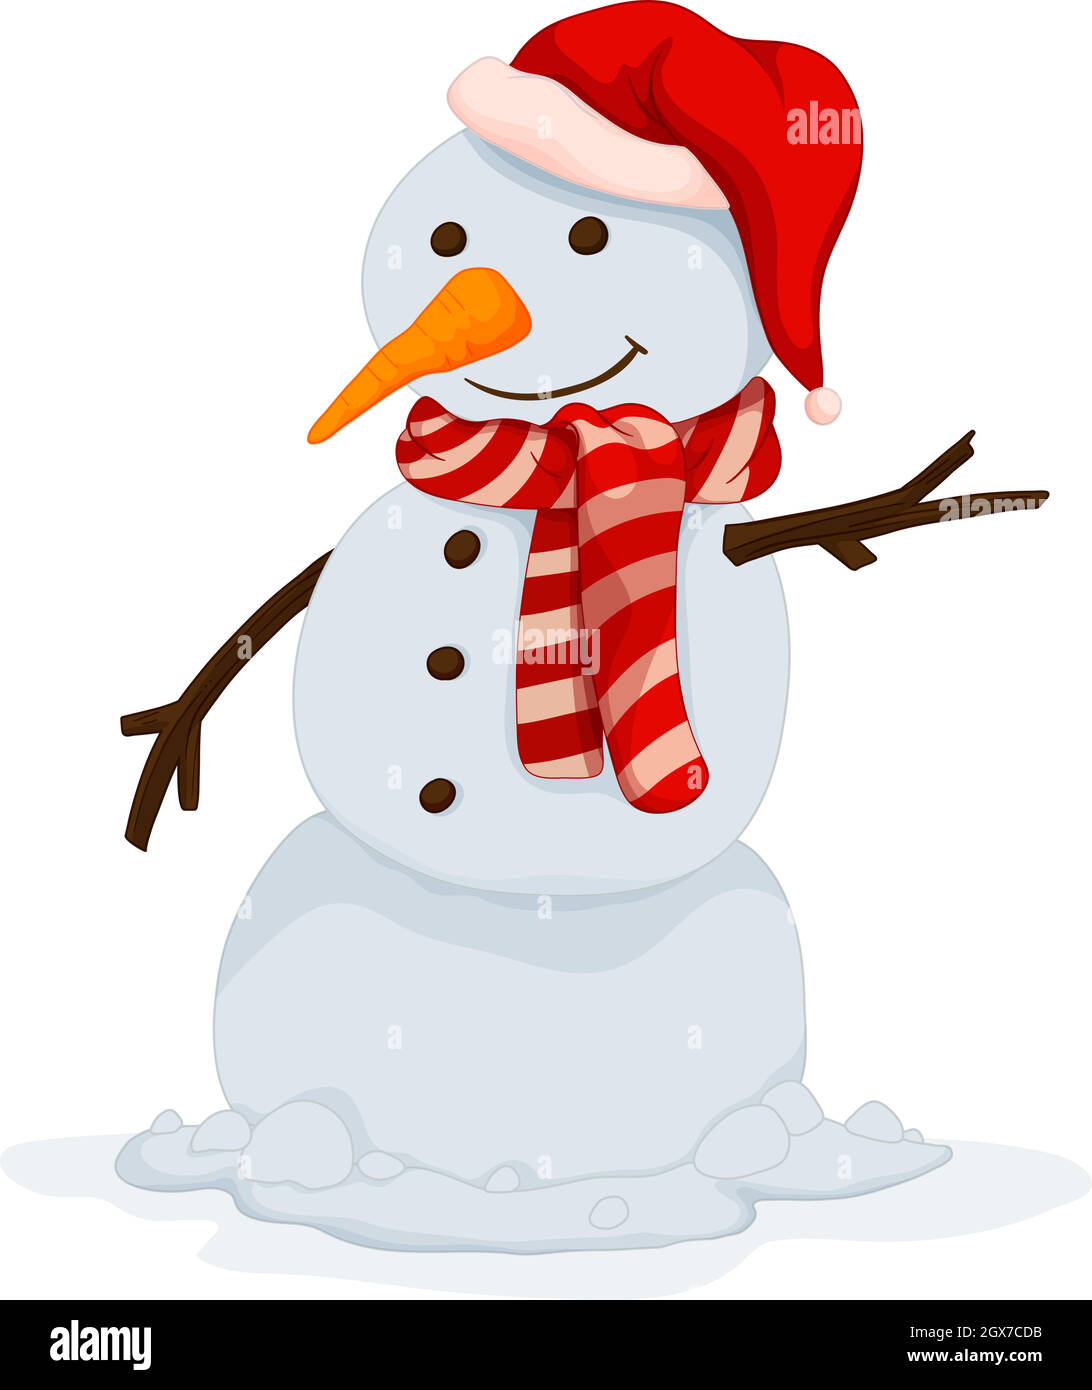 Snowman with happy face Stock Vector